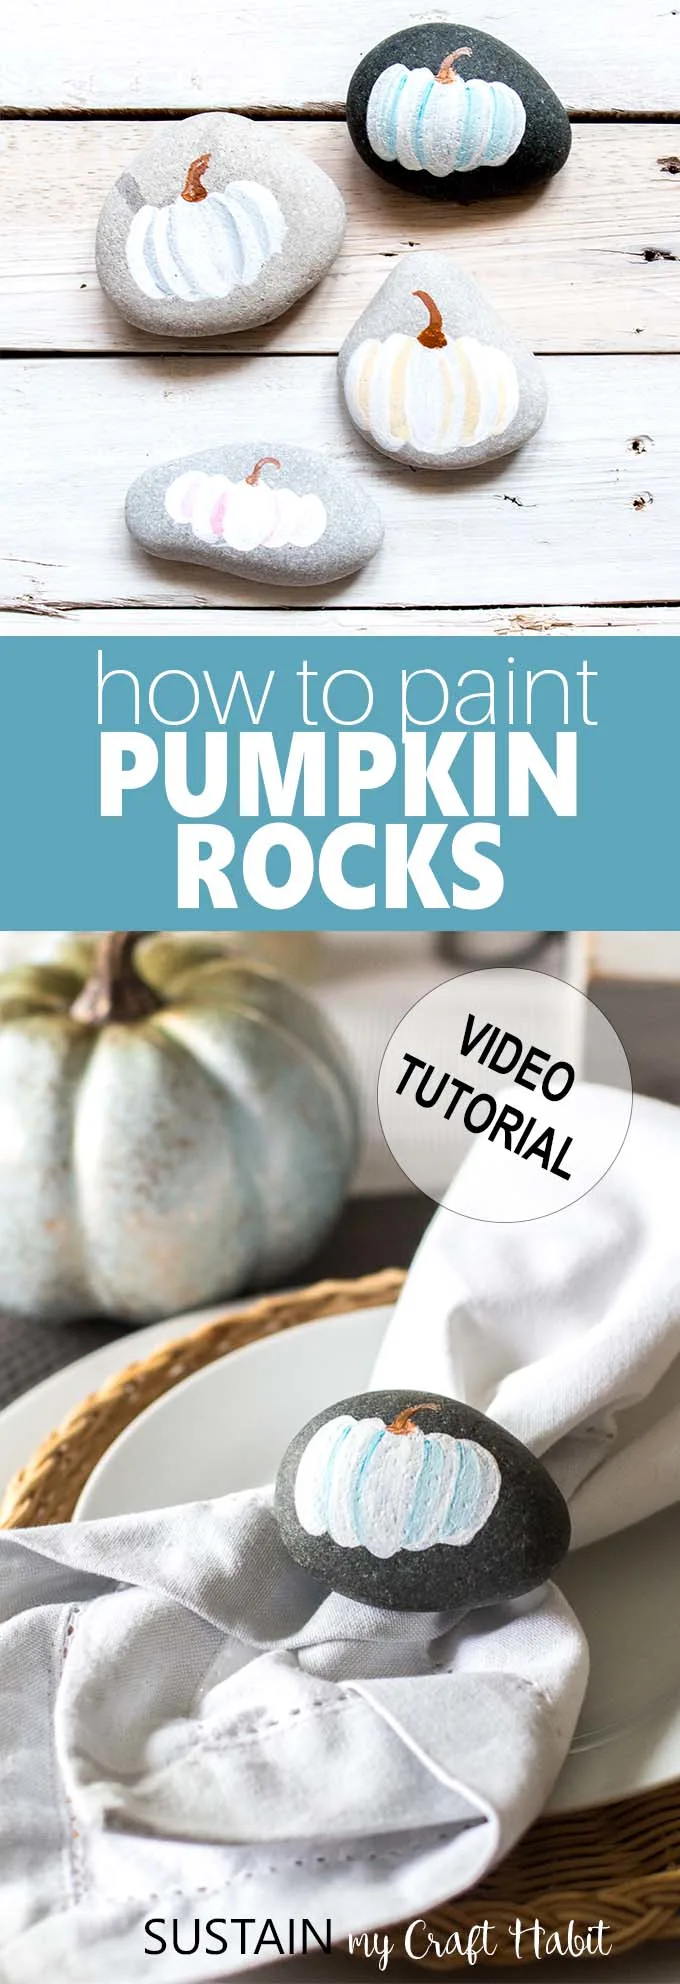 Collage of images showing this simple fall and Thanksgiving rock painting idea. The text overlay states how to paint pumpkin rocks.